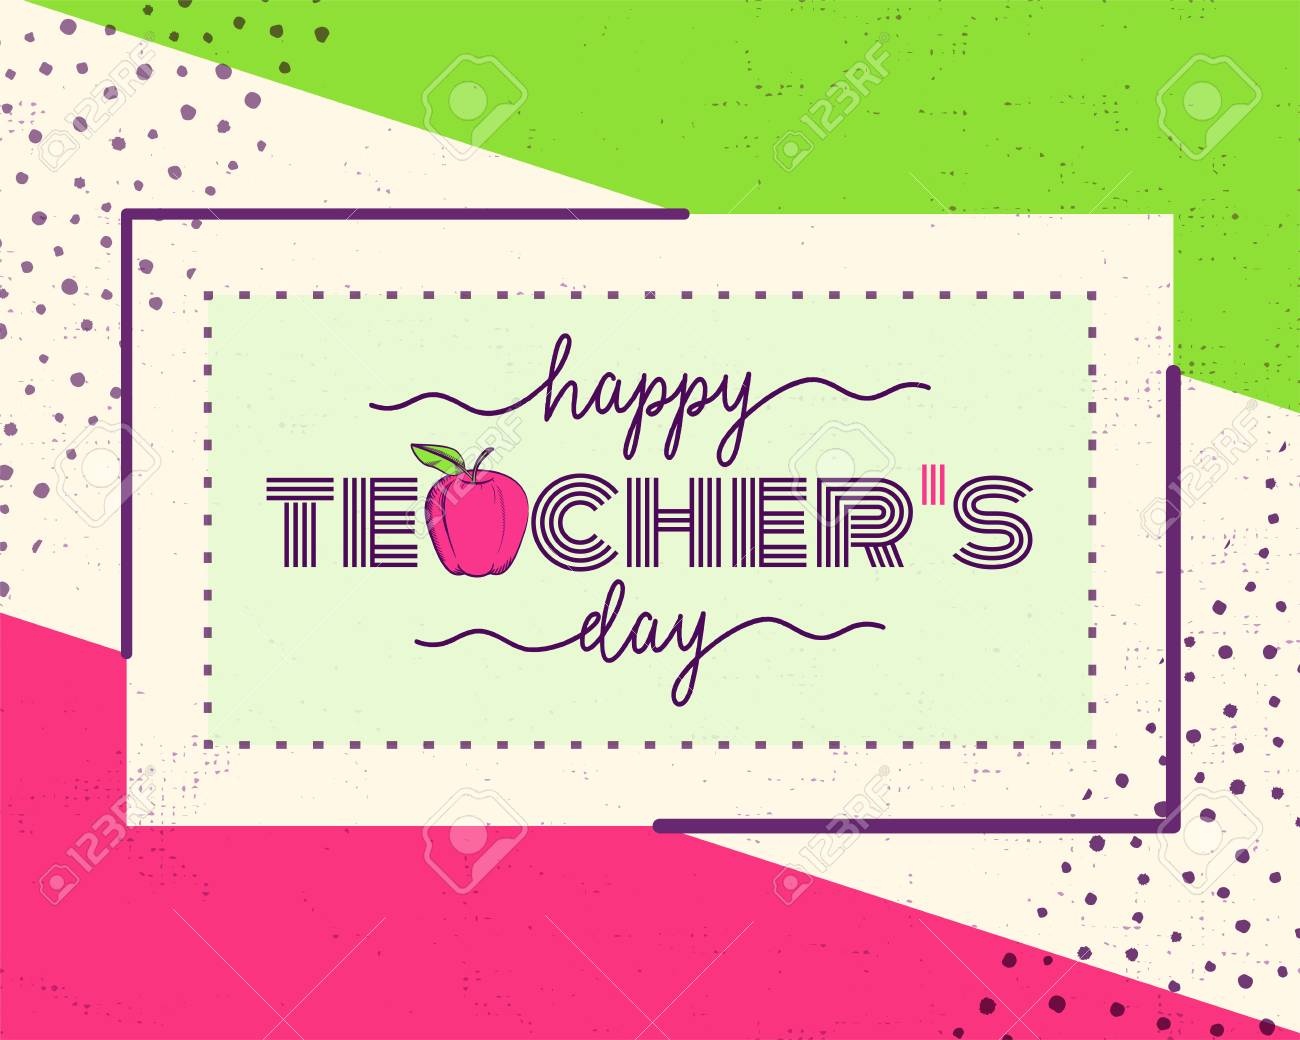 Vector Illustration Of Happy Teachers Day. Greeting Design For - Free Printable Teacher's Day Greeting Cards